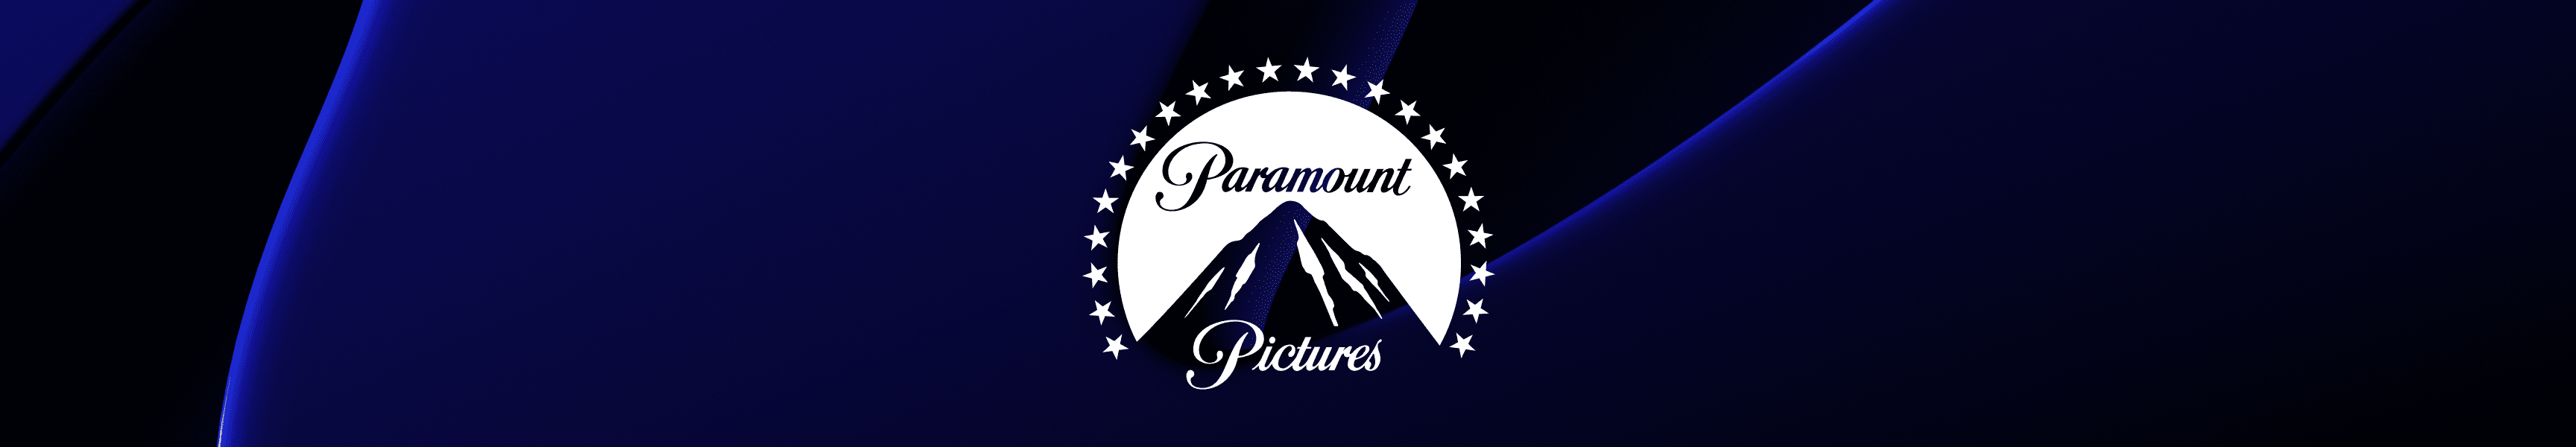 Paramount Pictures Toys